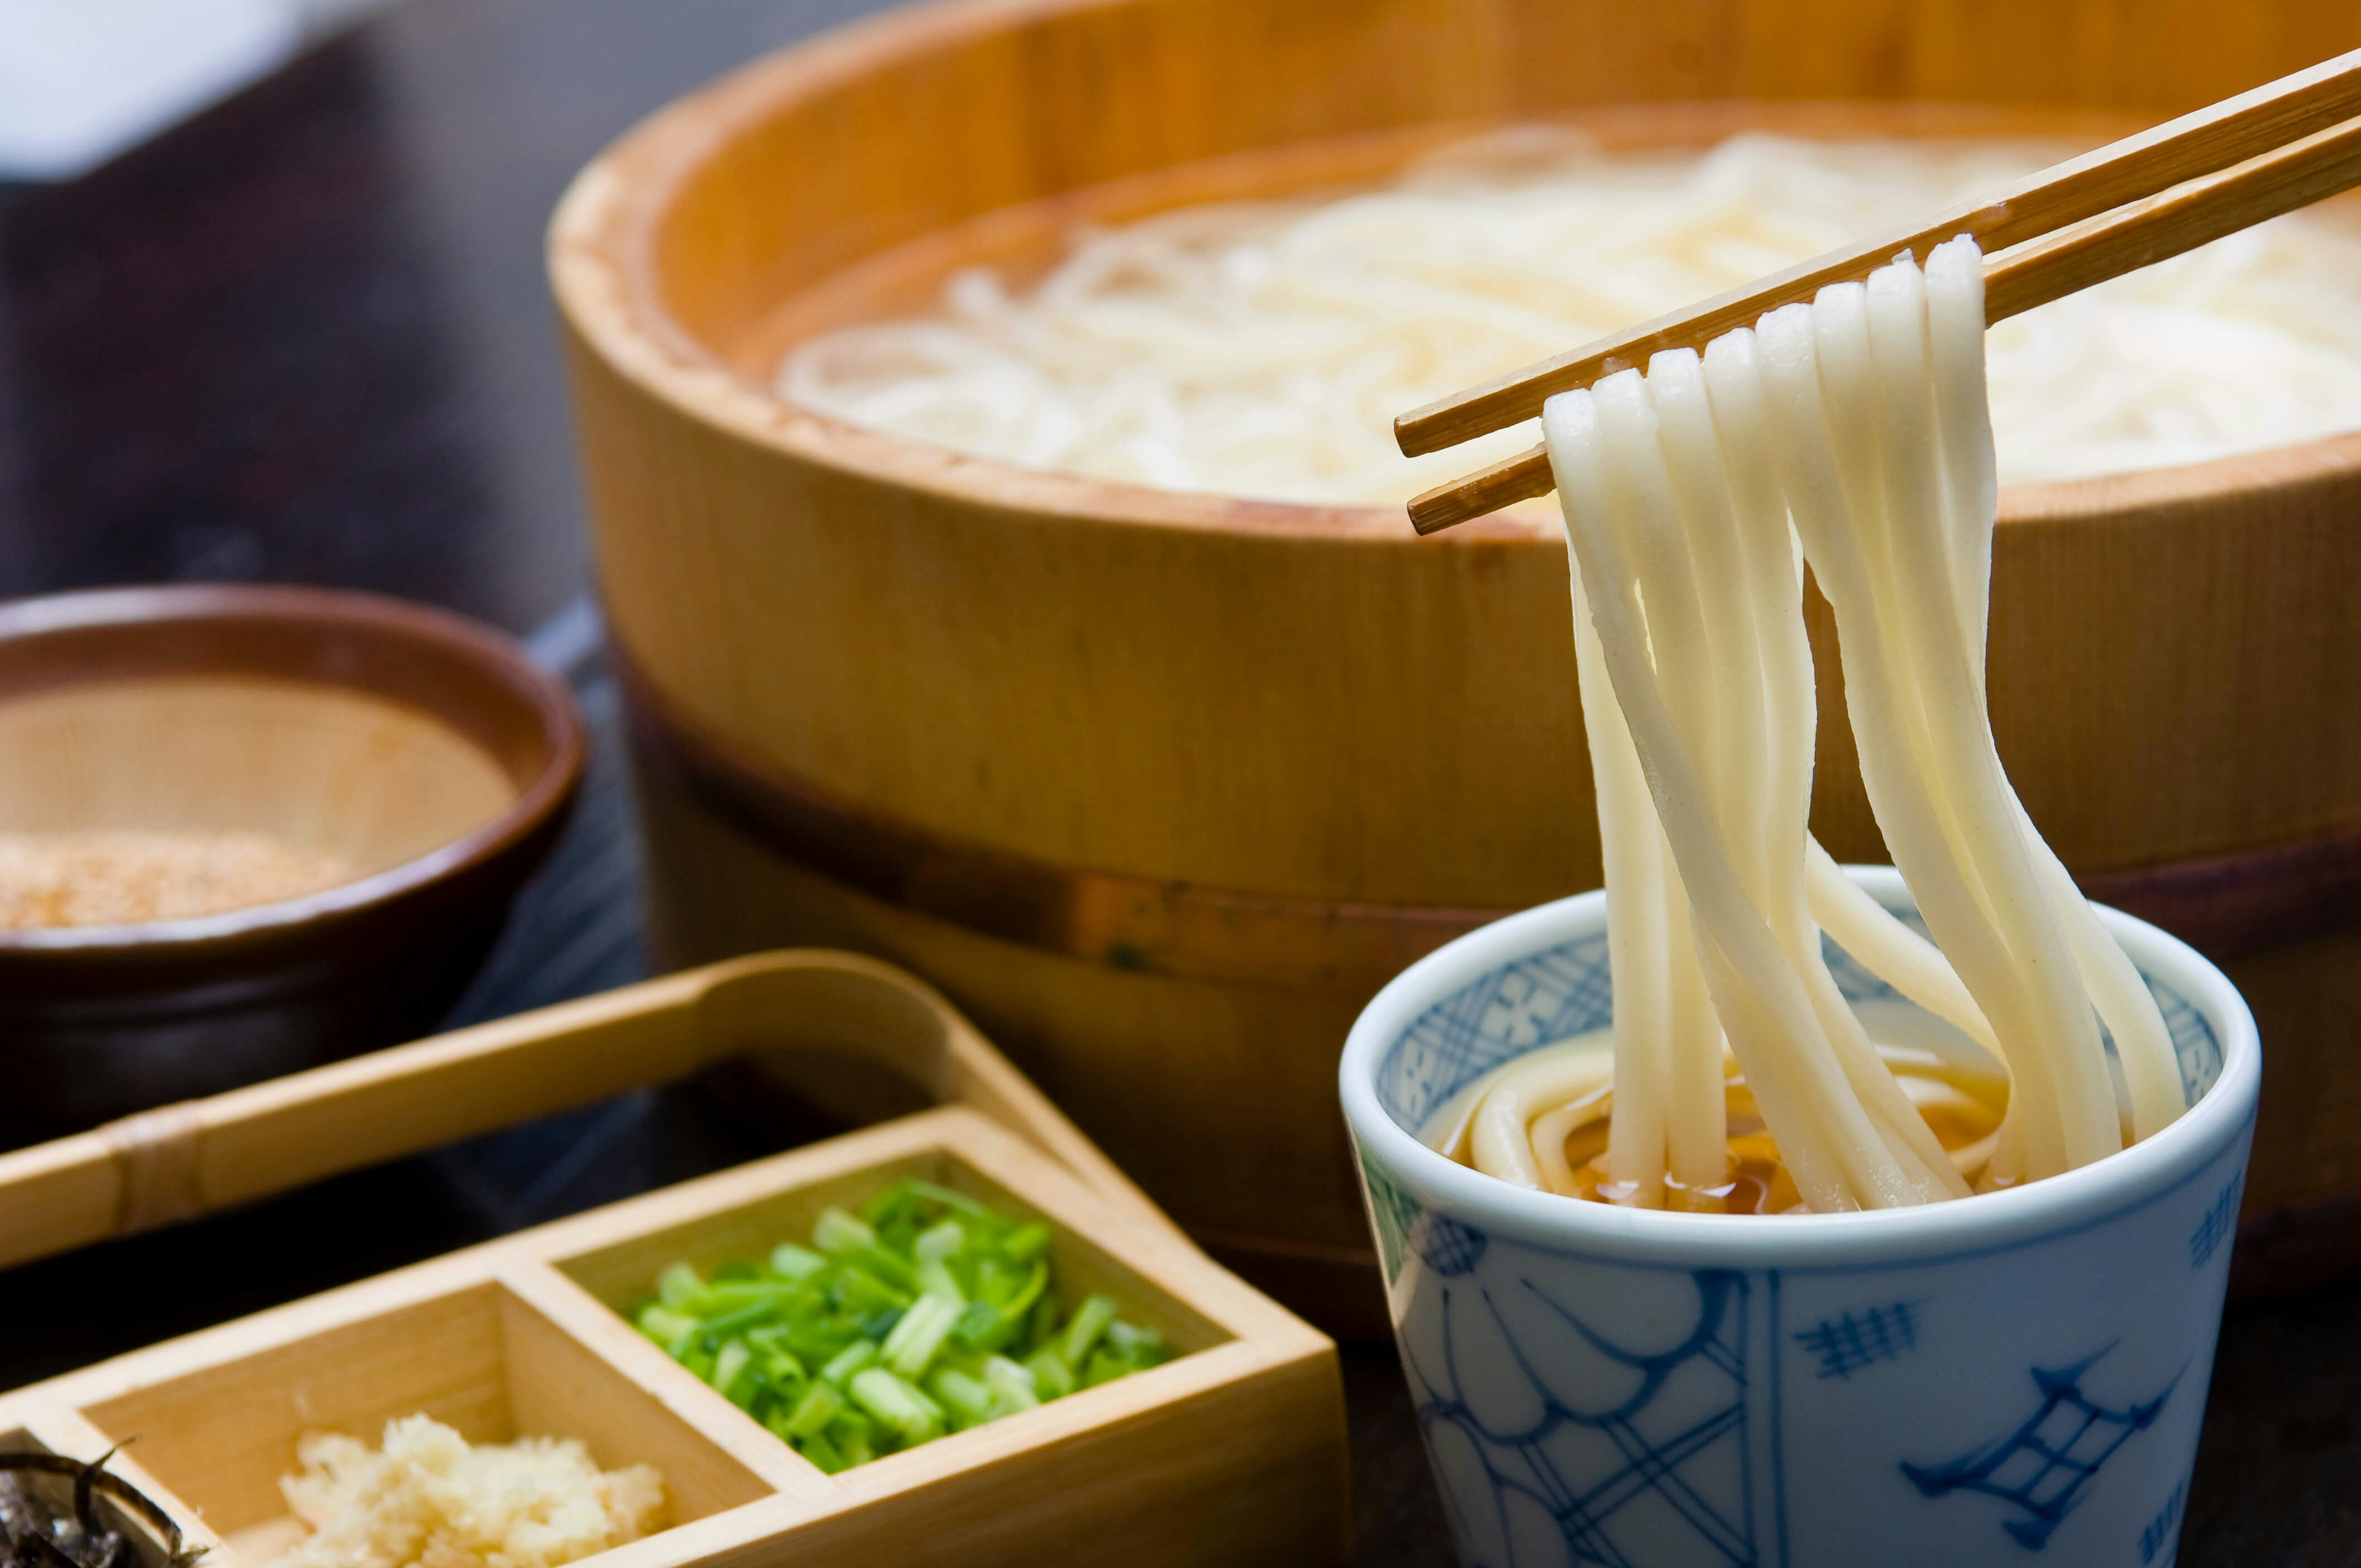 A pair of wooden chopsticks emerge from the right side of the frame to dunk several strands of white udon noodles into a small cup of broth. In the background is a large wooden tub of udon noodles, while to the left sits a wooden box filled with green onions in one compartment and ginger in the other.